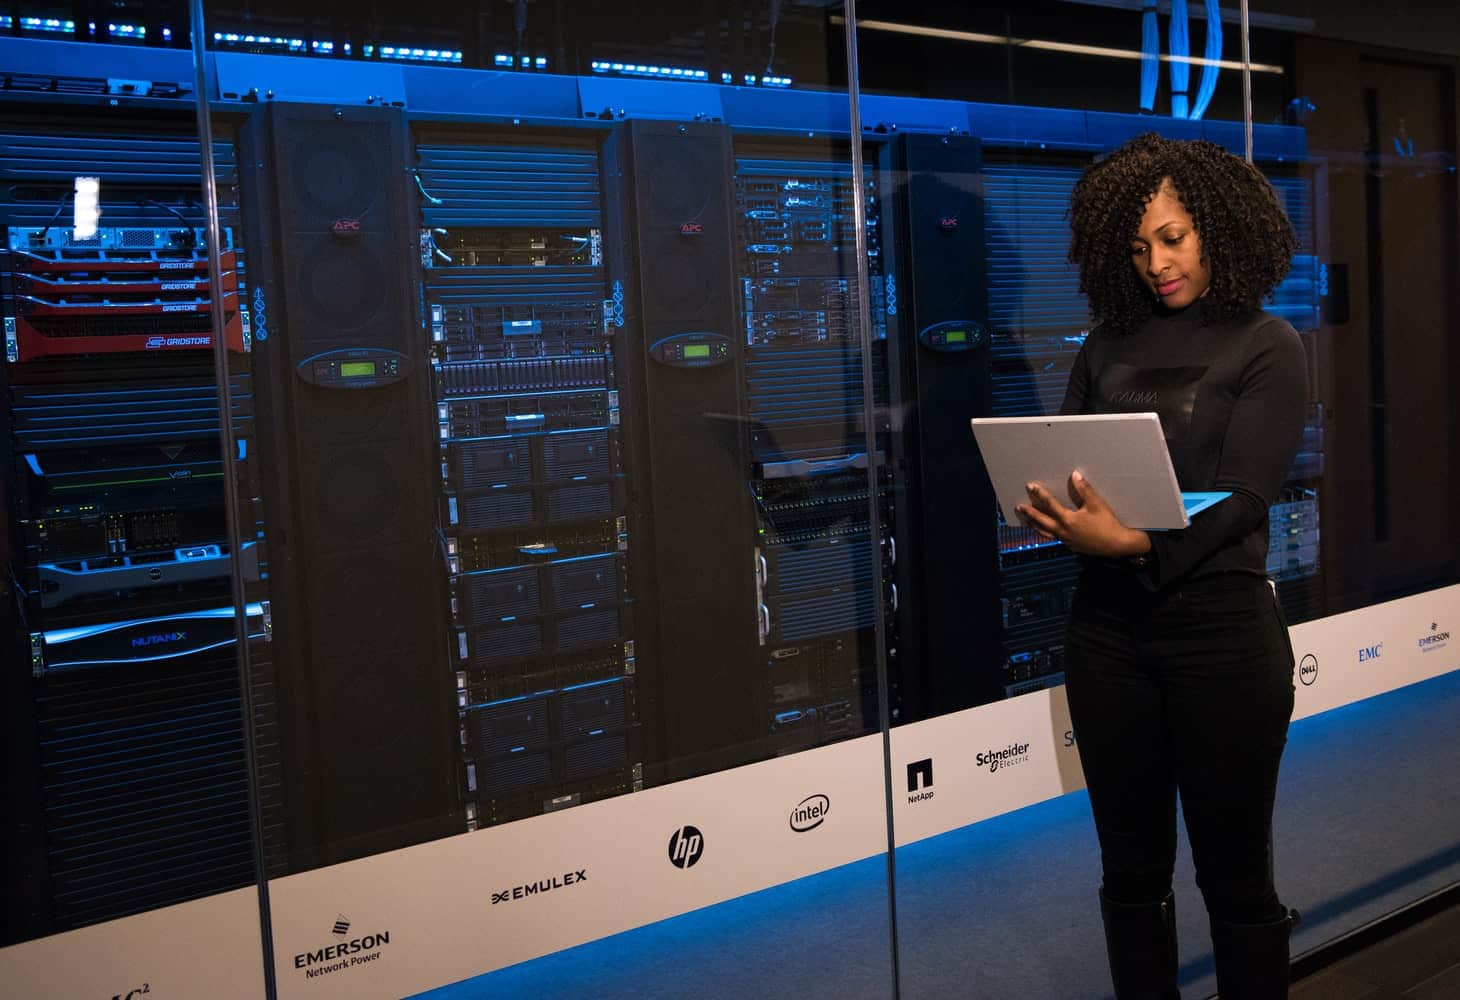 A software engineer standing beside servers. How to Improve Your Chances of Getting Hired at IBM